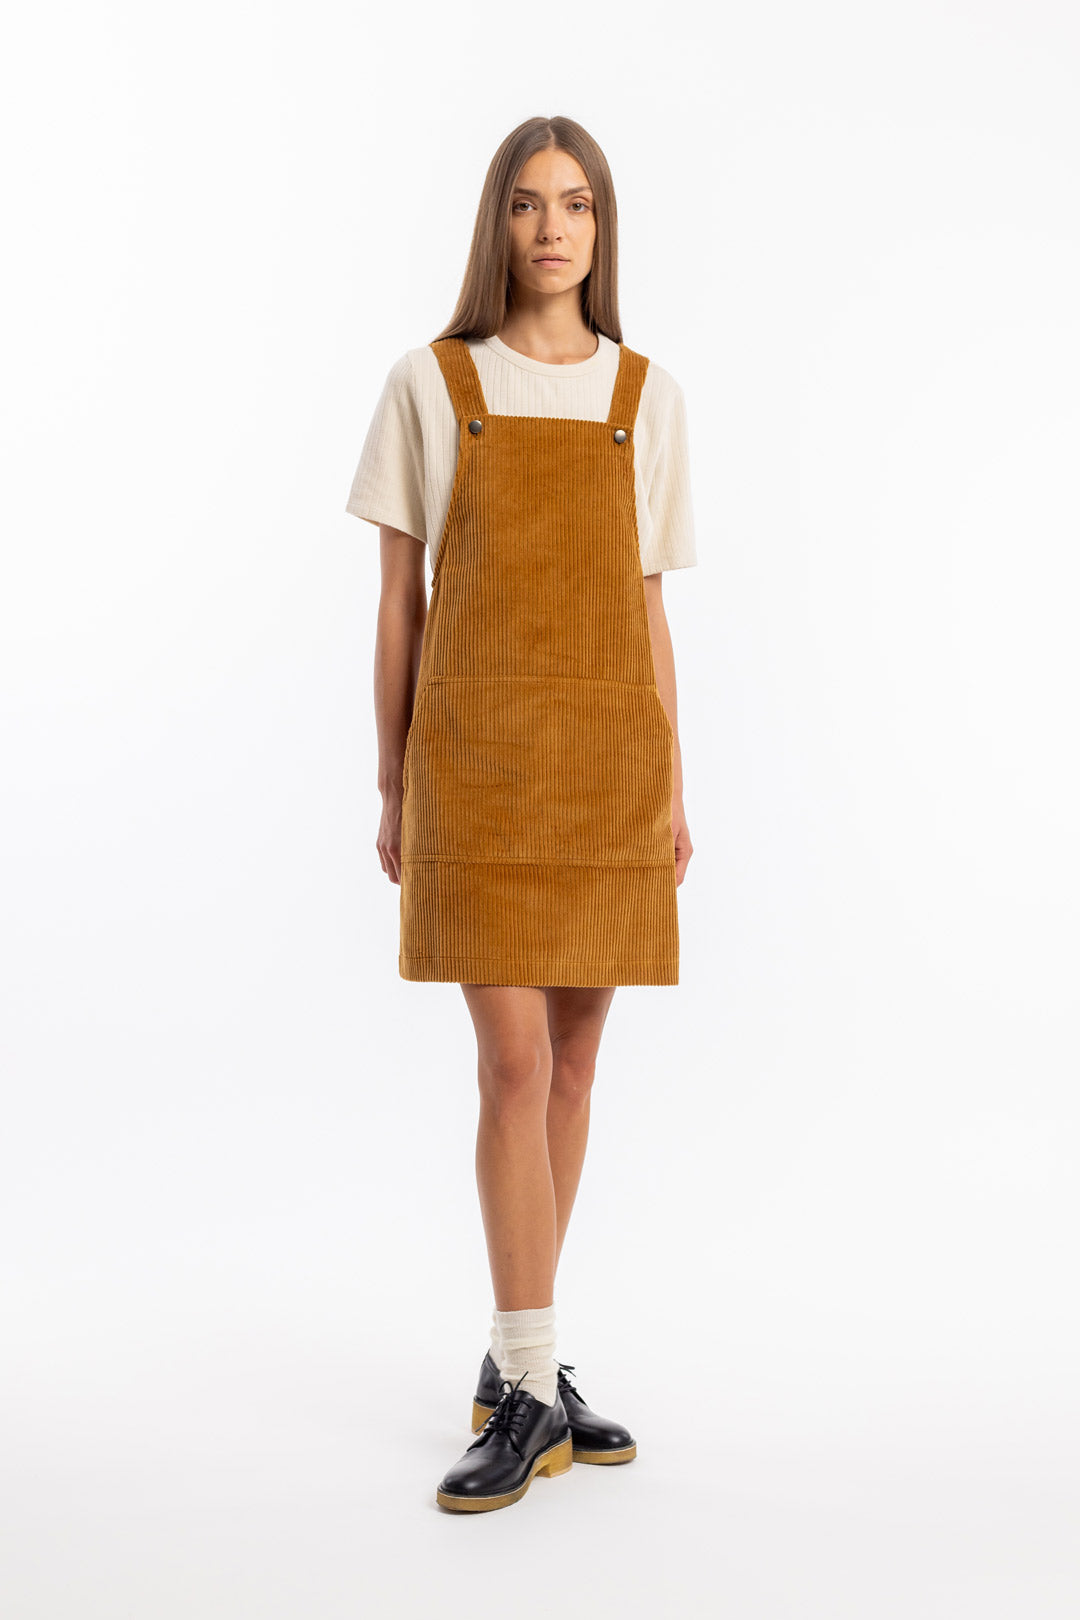 Toffee-colored corduroy dungaree dress made from 100% organic cotton from Rotholz